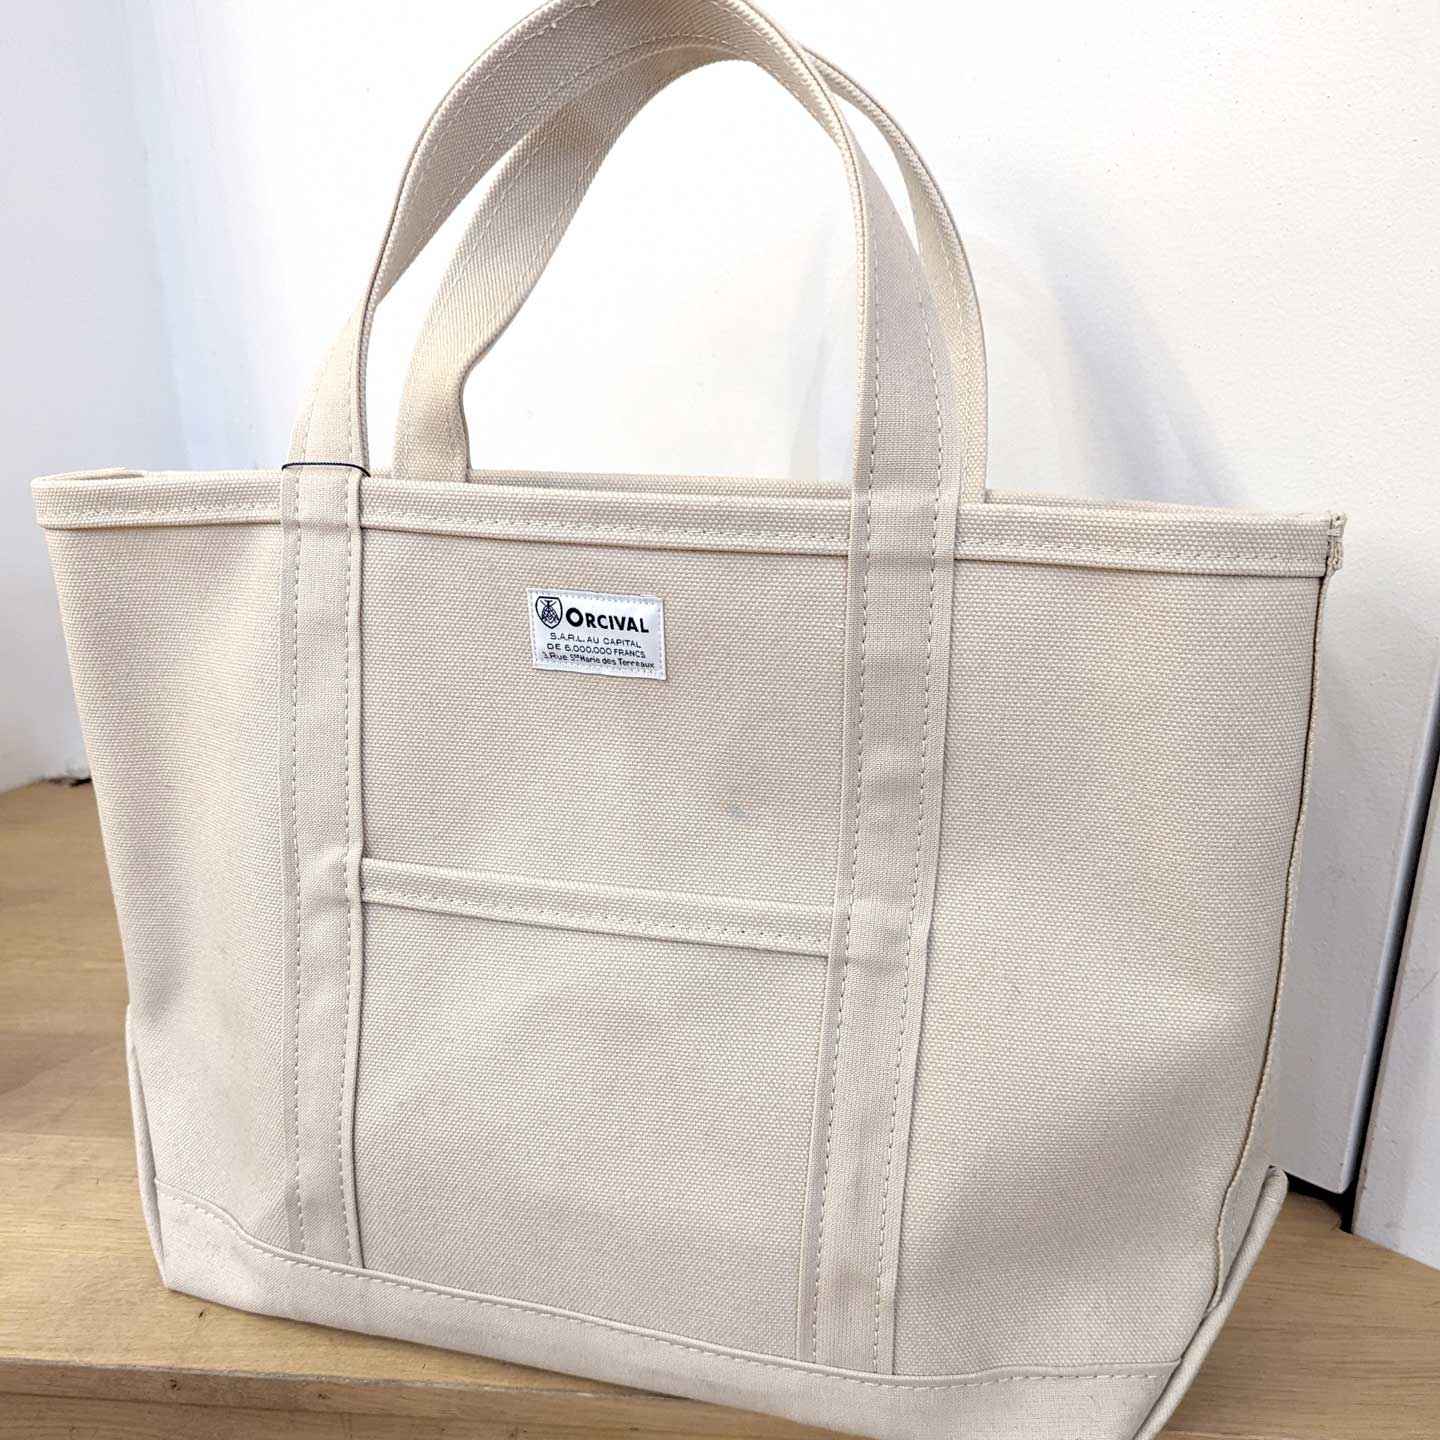 The Sand Beige tote bag, in a medium size, by Orcival